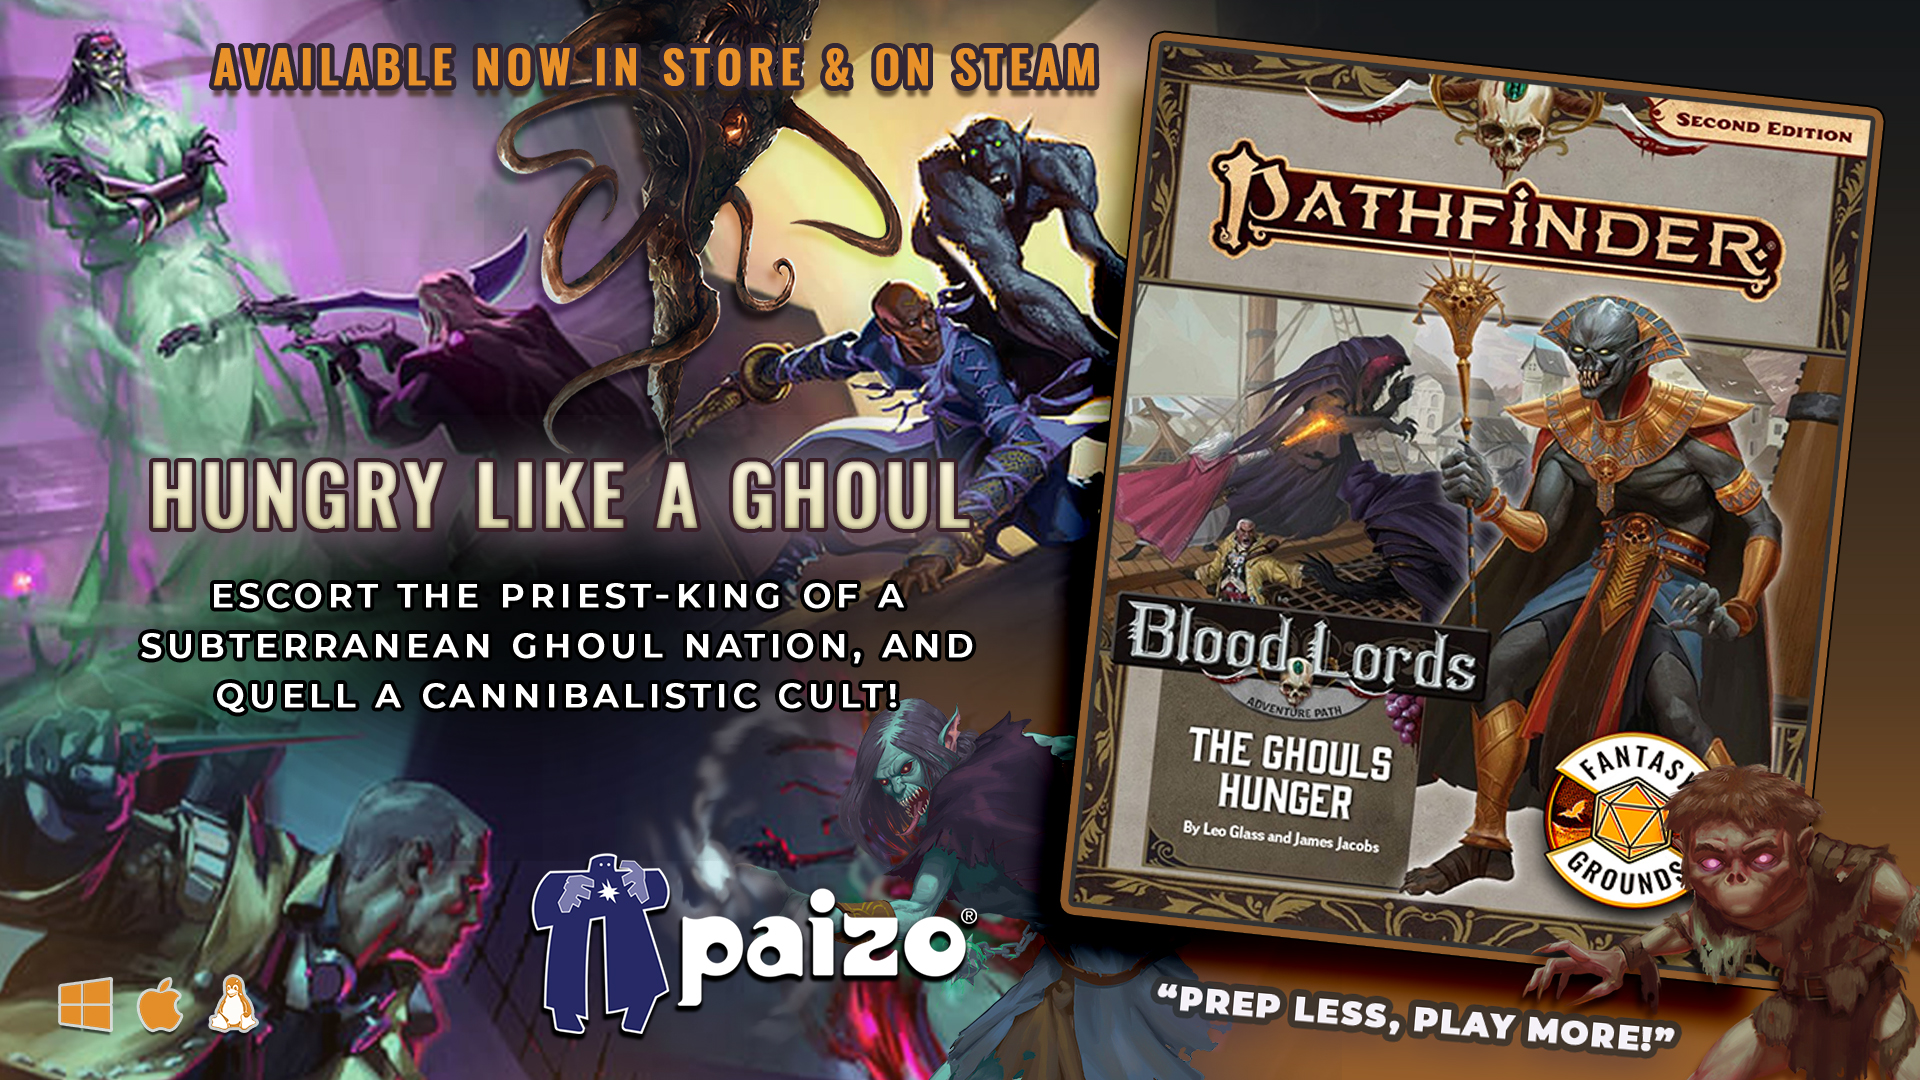 Pathfinder 2 RPG - Blood Lords AP 4 The Ghouls Hunger(PZOSMWPZO90184FG).jpg